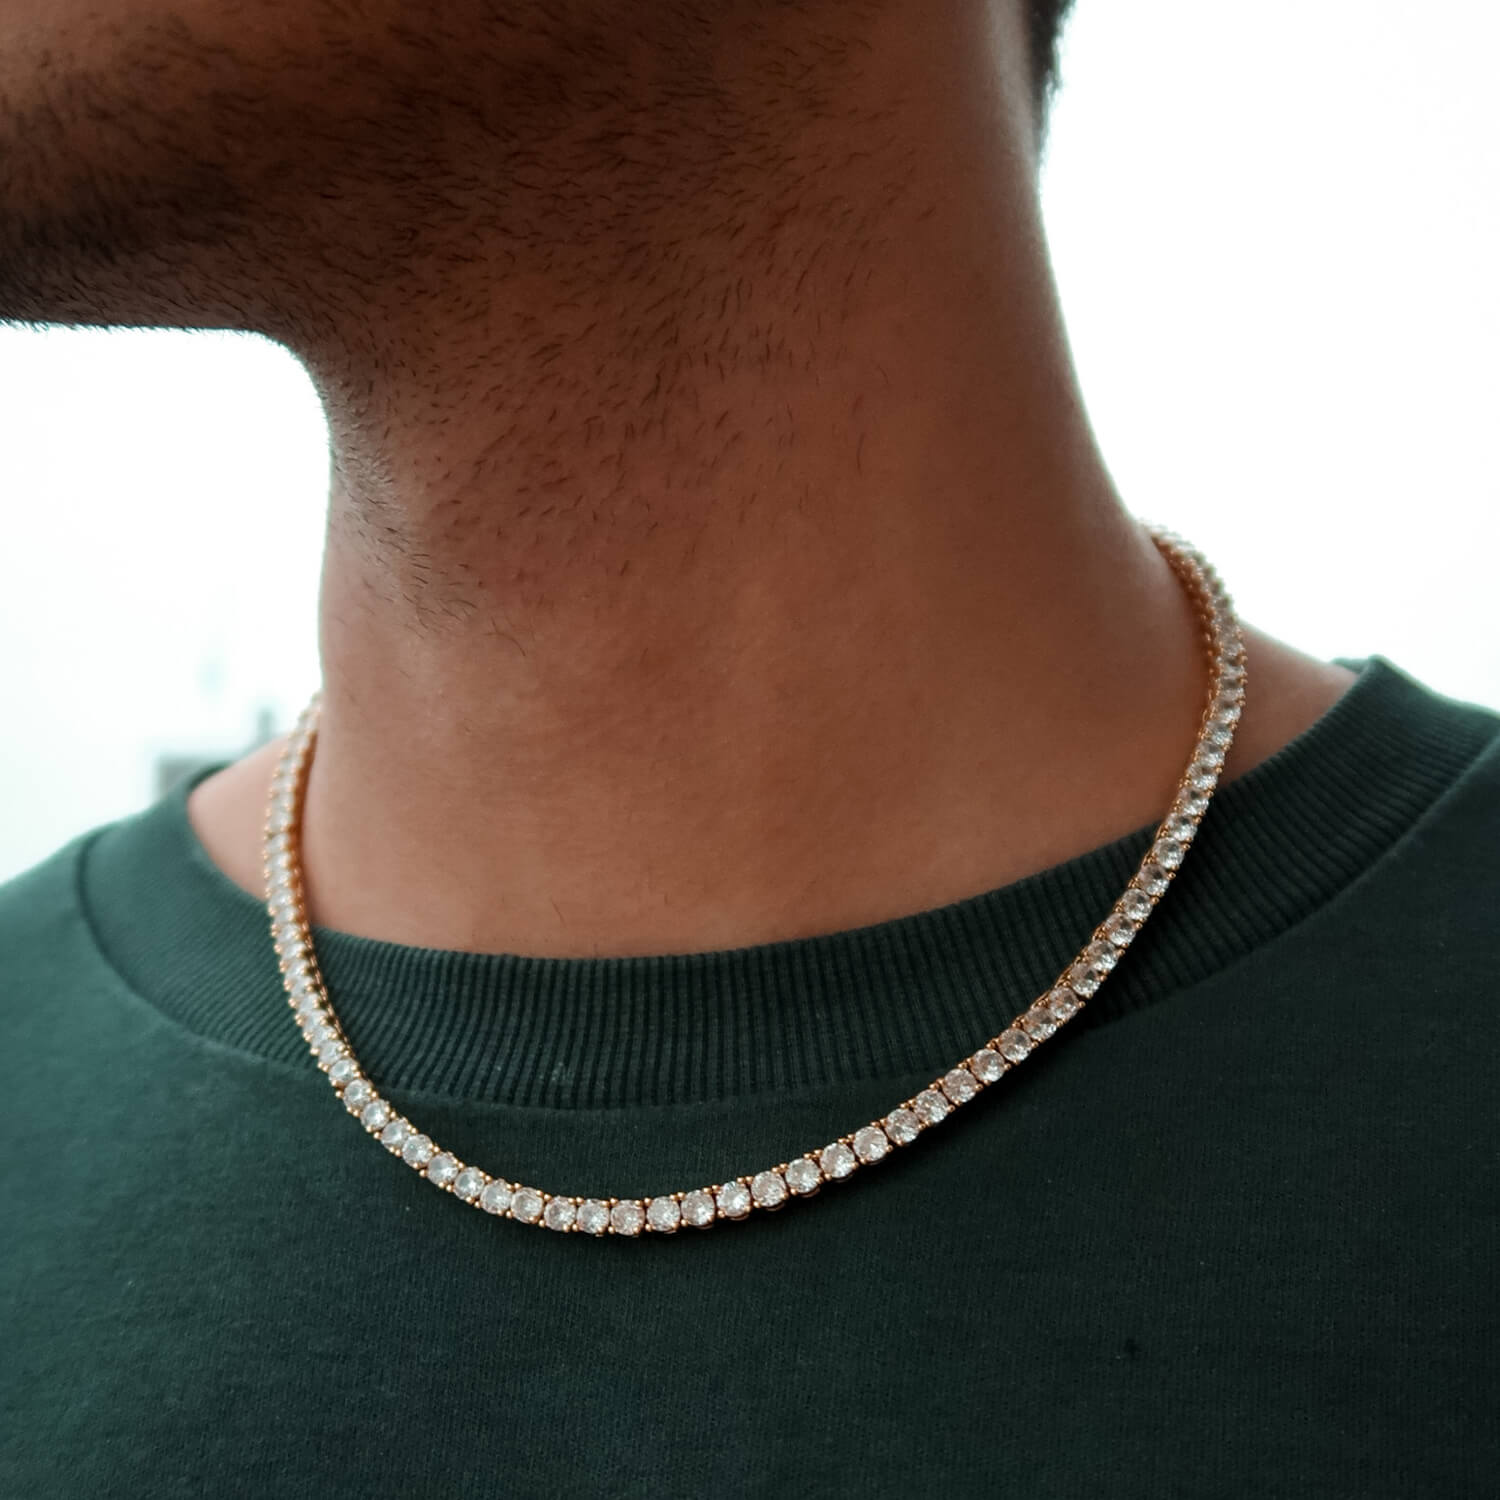 4mm gold tennis chain on male neck